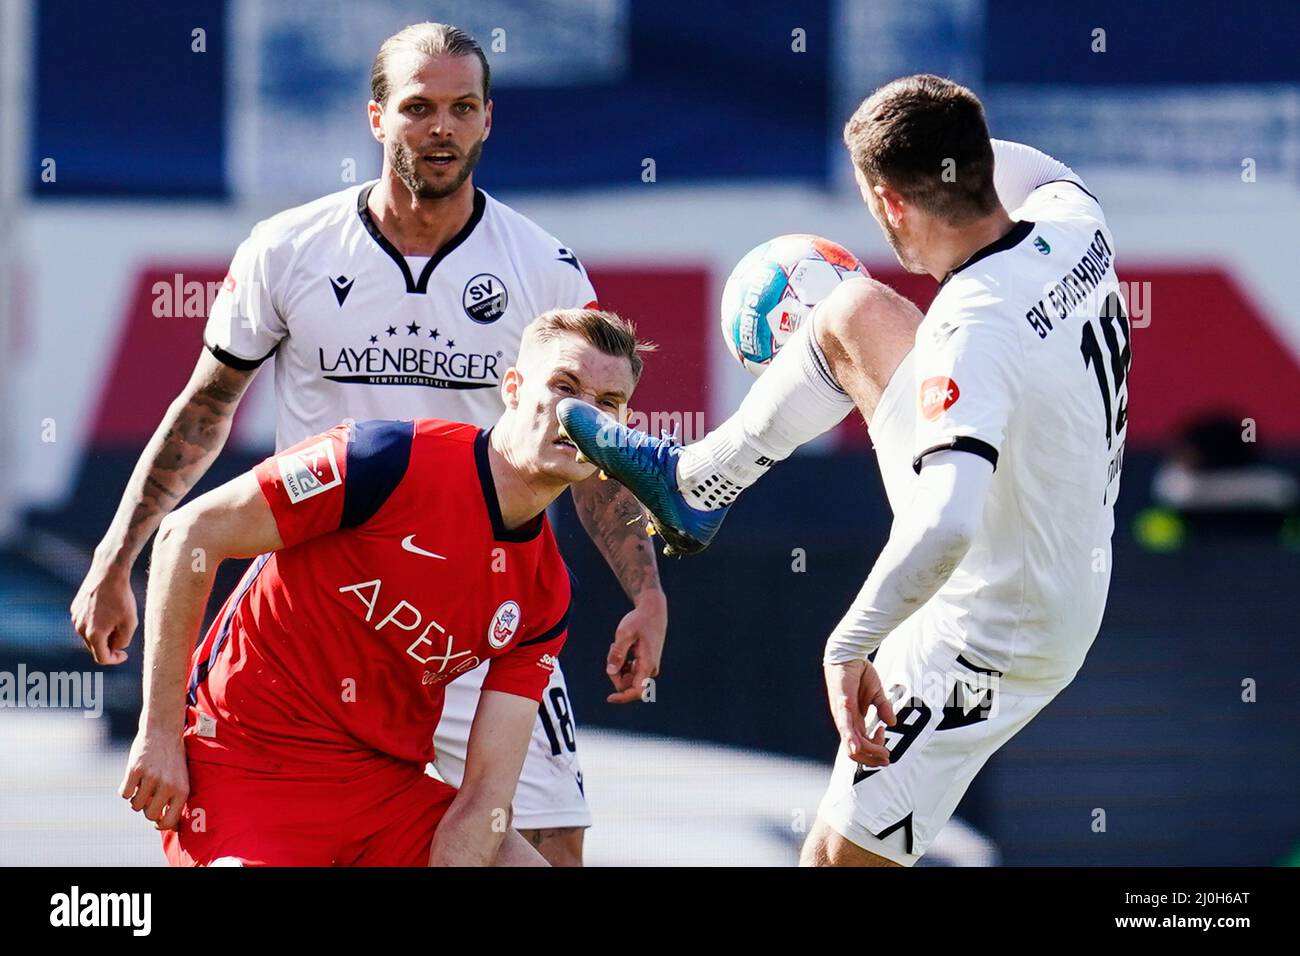 Sandhausen, Germany. 19th Mar, 2022. Soccer: 2. Bundesliga, SV Sandhausen - Hansa Rostock, Matchday 27, BWT-Stadion am Hardtwald. Sandhausen's Dennis Diekmeier (l-r), Rostock's Svante Ingelsson and Sandhausen's Bashkim Ajdini fight for the ball. Credit: Uwe Anspach/dpa - IMPORTANT NOTE: In accordance with the requirements of the DFL Deutsche Fußball Liga and the DFB Deutscher Fußball-Bund, it is prohibited to use or have used photographs taken in the stadium and/or of the match in the form of sequence pictures and/or video-like photo series./dpa/Alamy Live News Stock Photo